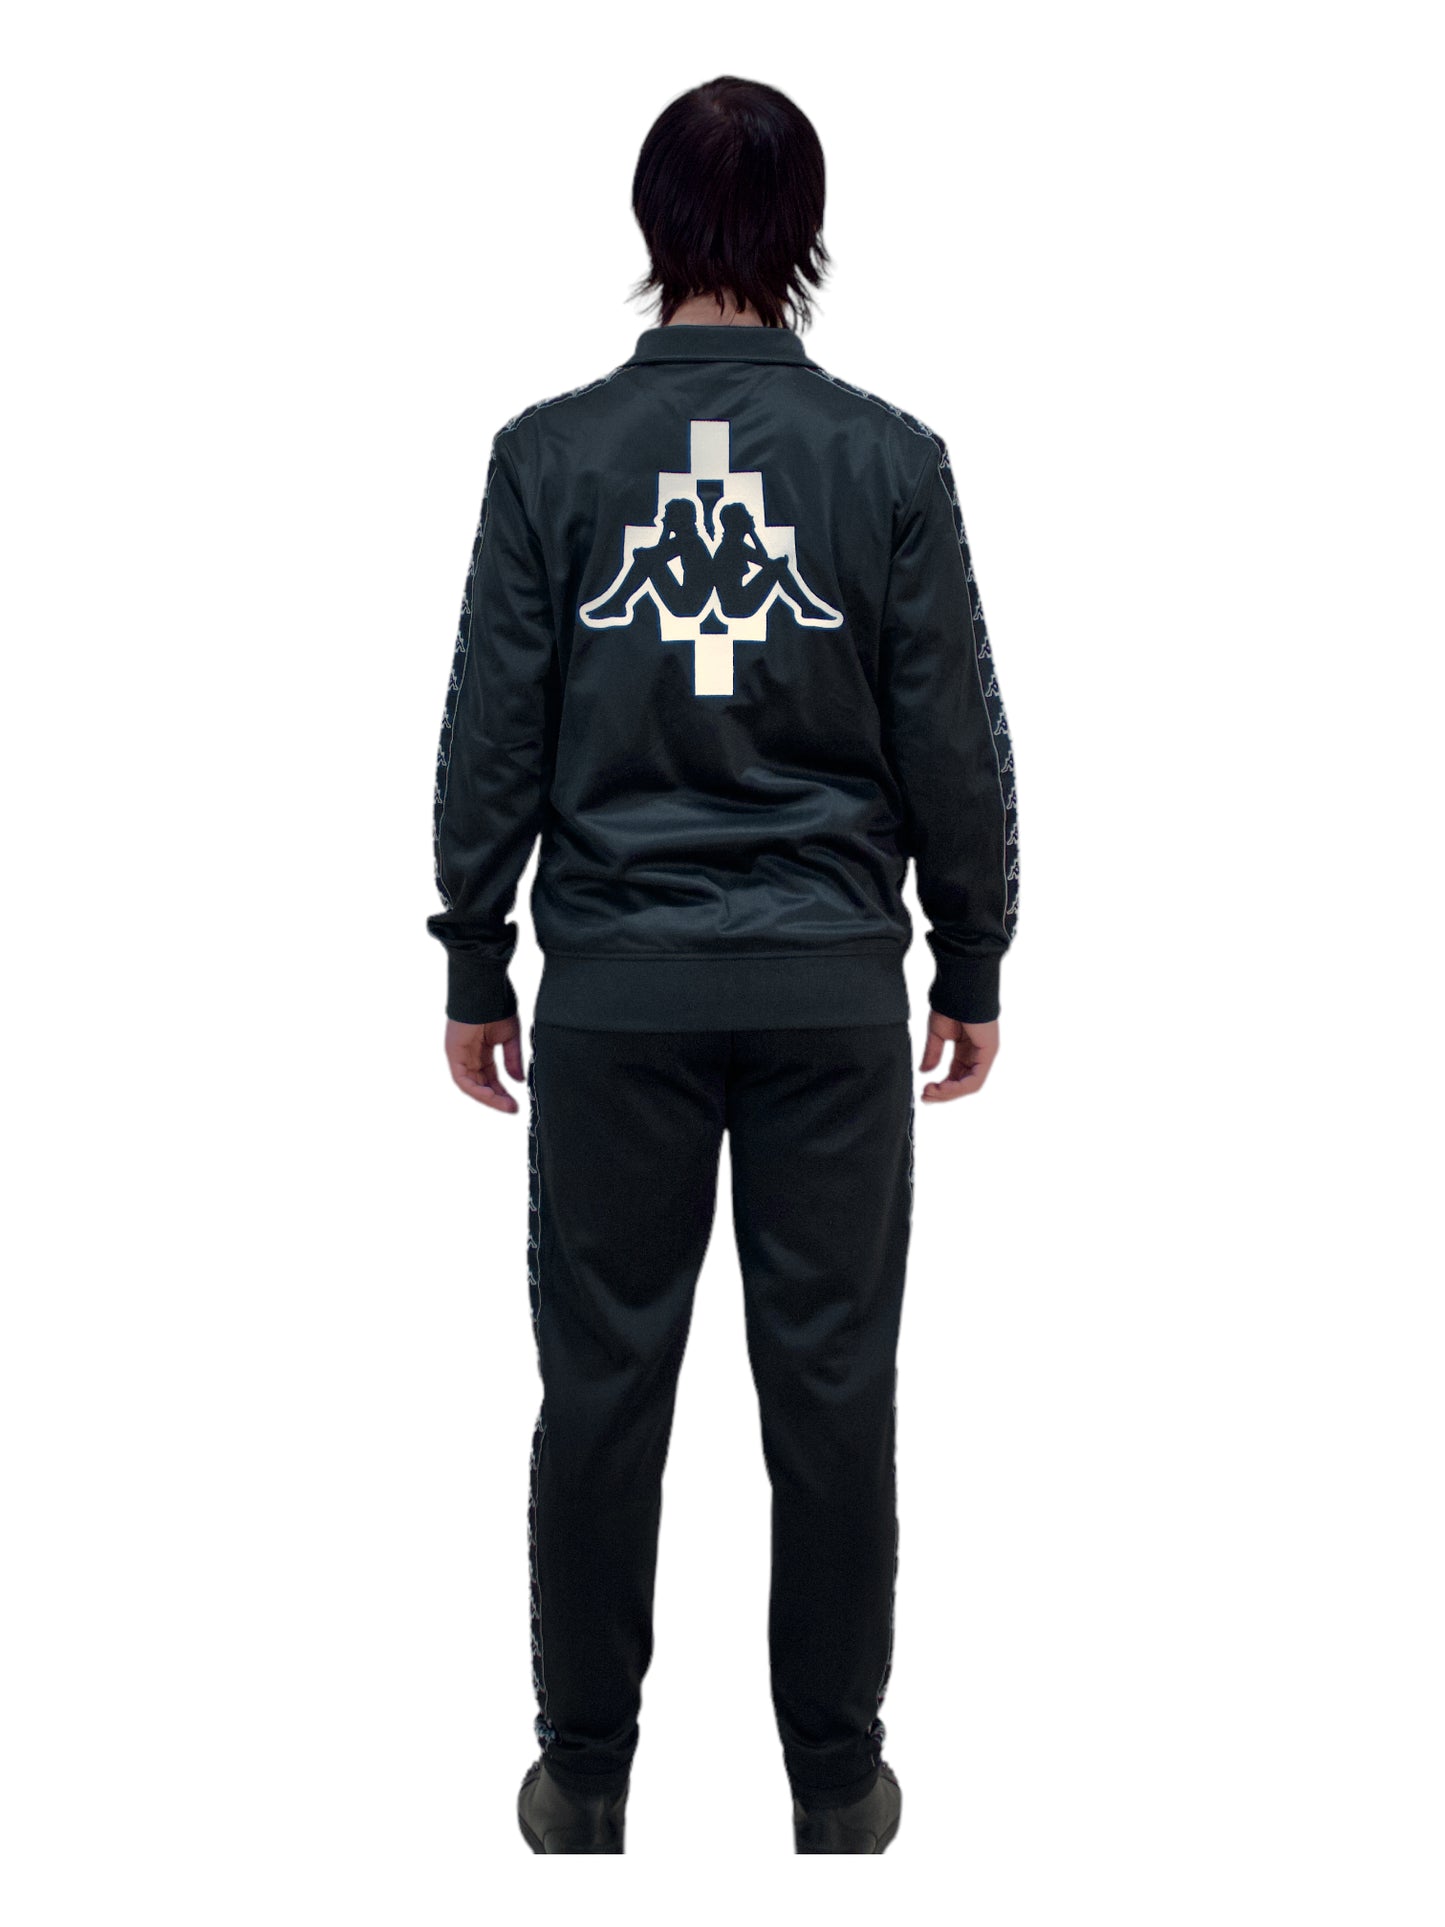 Marcelo Burlon X Kappa Black Tracksuit Top - Genuine Design Luxury Consignment. New & Pre-Owned Clothing, Shoes, & Accessories. Calgary, Canada